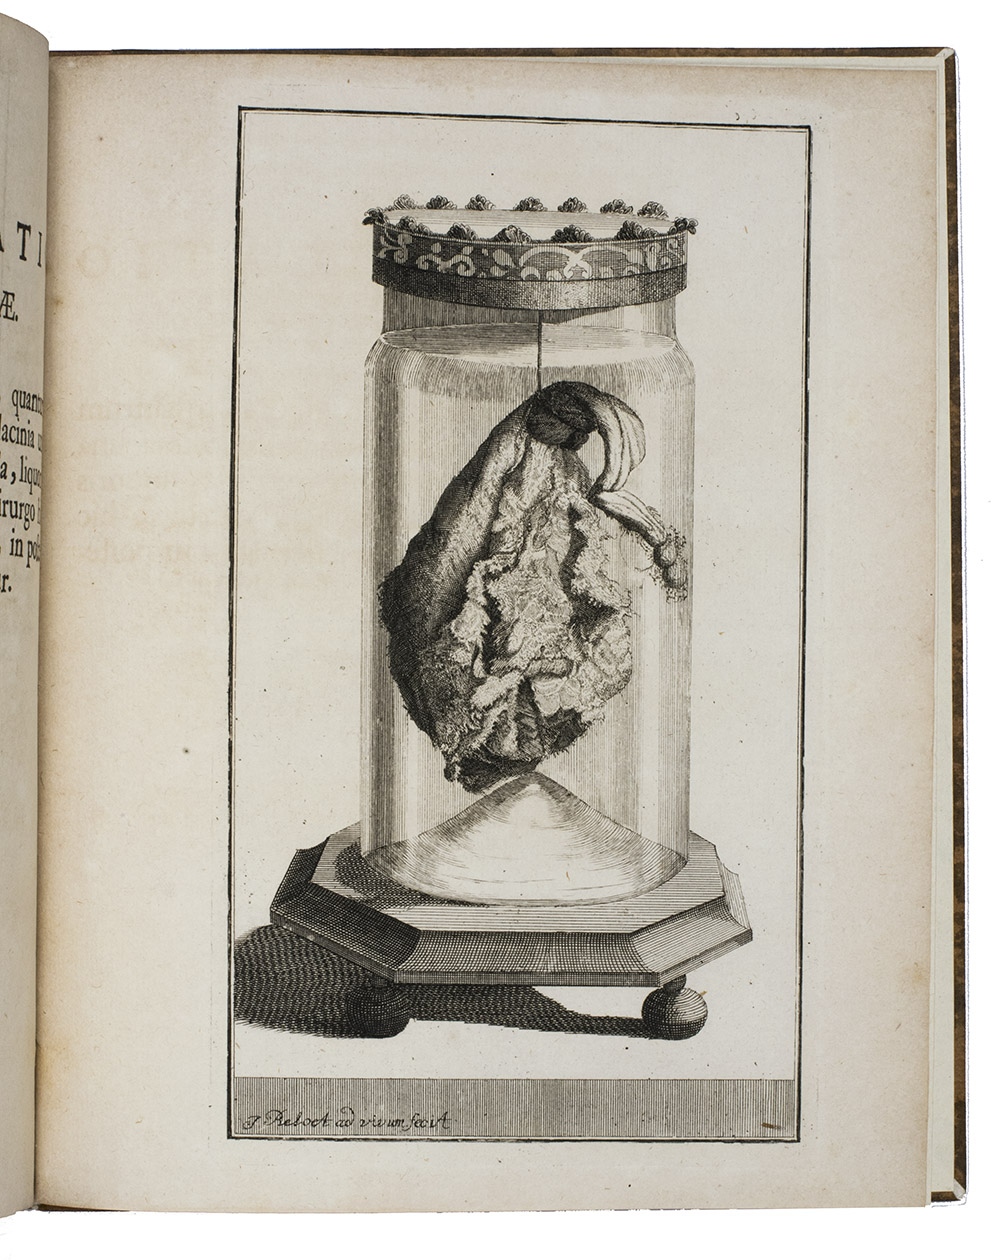 KOCH, Christian Andreas. - Affectum in libris et praxi rarissimum ab Hermanno Boerhaave in nosocomio Lugduno-Batavo.Leiden, Philippus Bonk, 1738. 4to. With a full-page plate of a human body part in formaldehyde and an engraved printer's device on the title-page. Also with some woodcut initials and headpieces. Modern half calf.